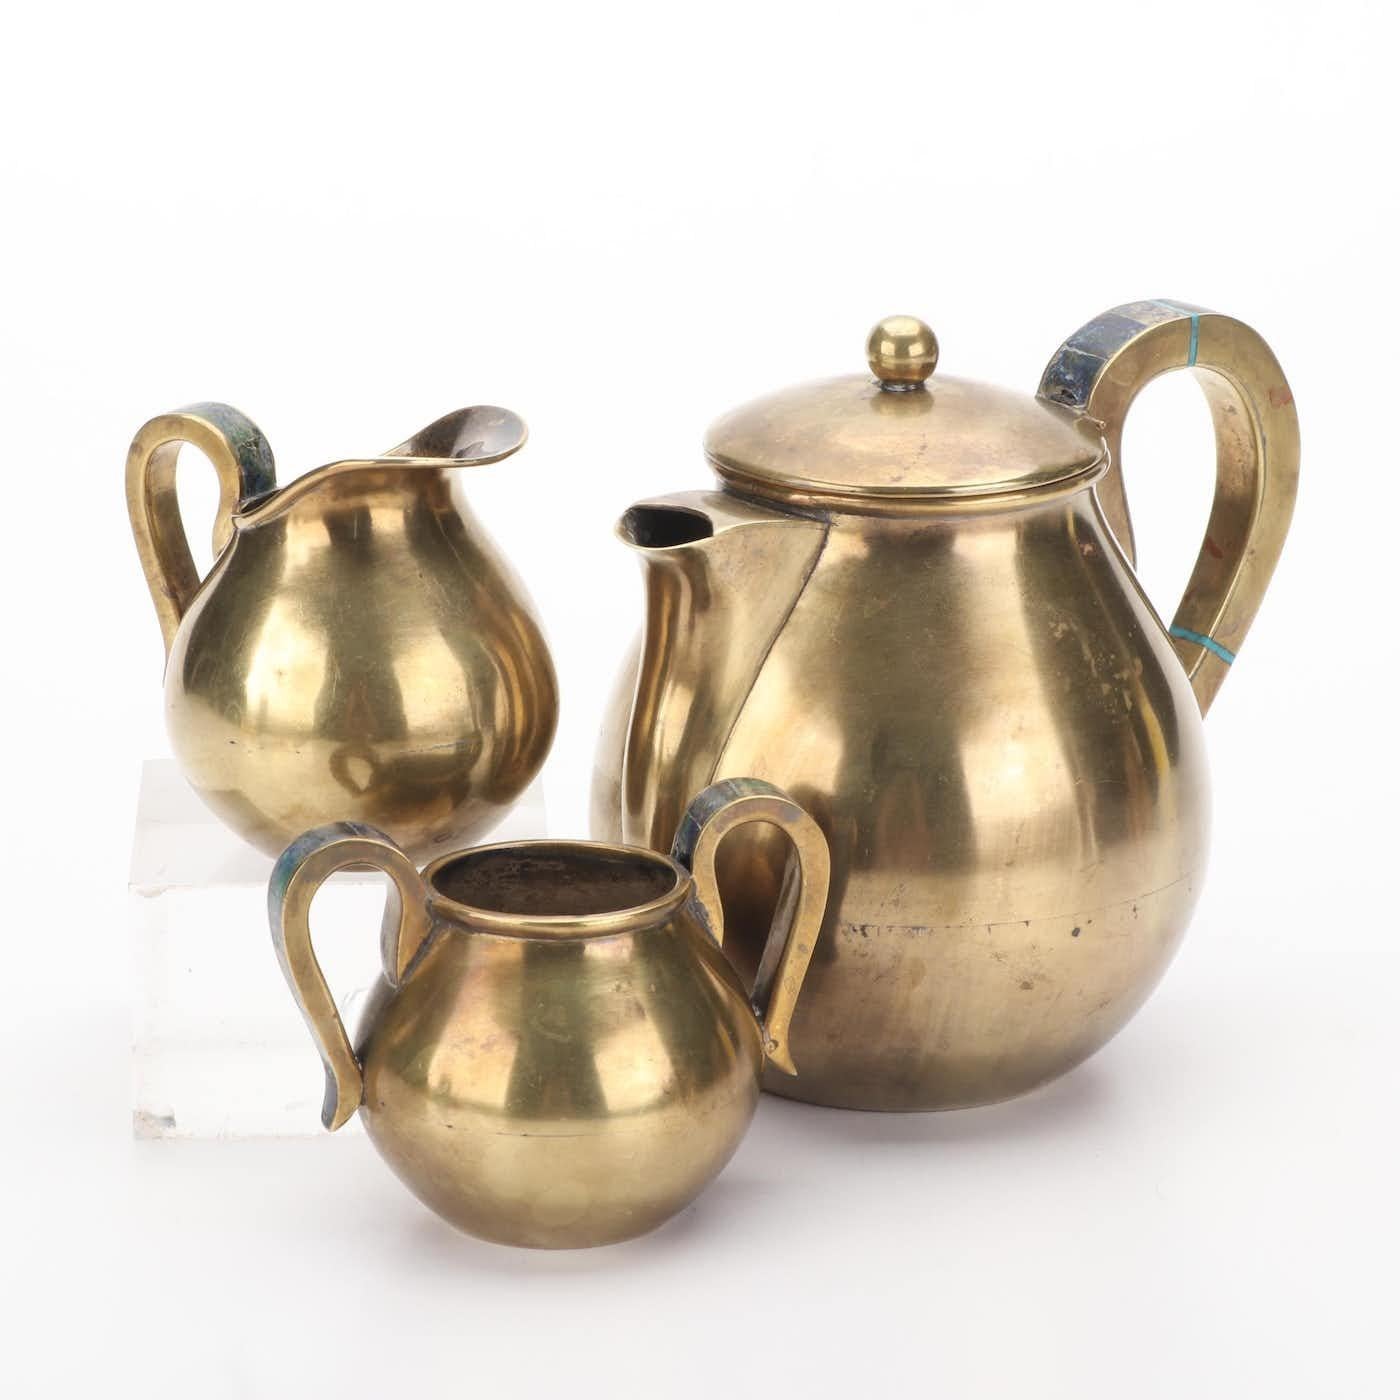 Introducing the exquisite Brass & Stone Inlay by Justo Lucio Castillo for Los Castillo, Mexico, a true testament to the artistry of 1960's design. This meticulously crafted set of tea, sugar and creamer pots is a striking addition to any discerning